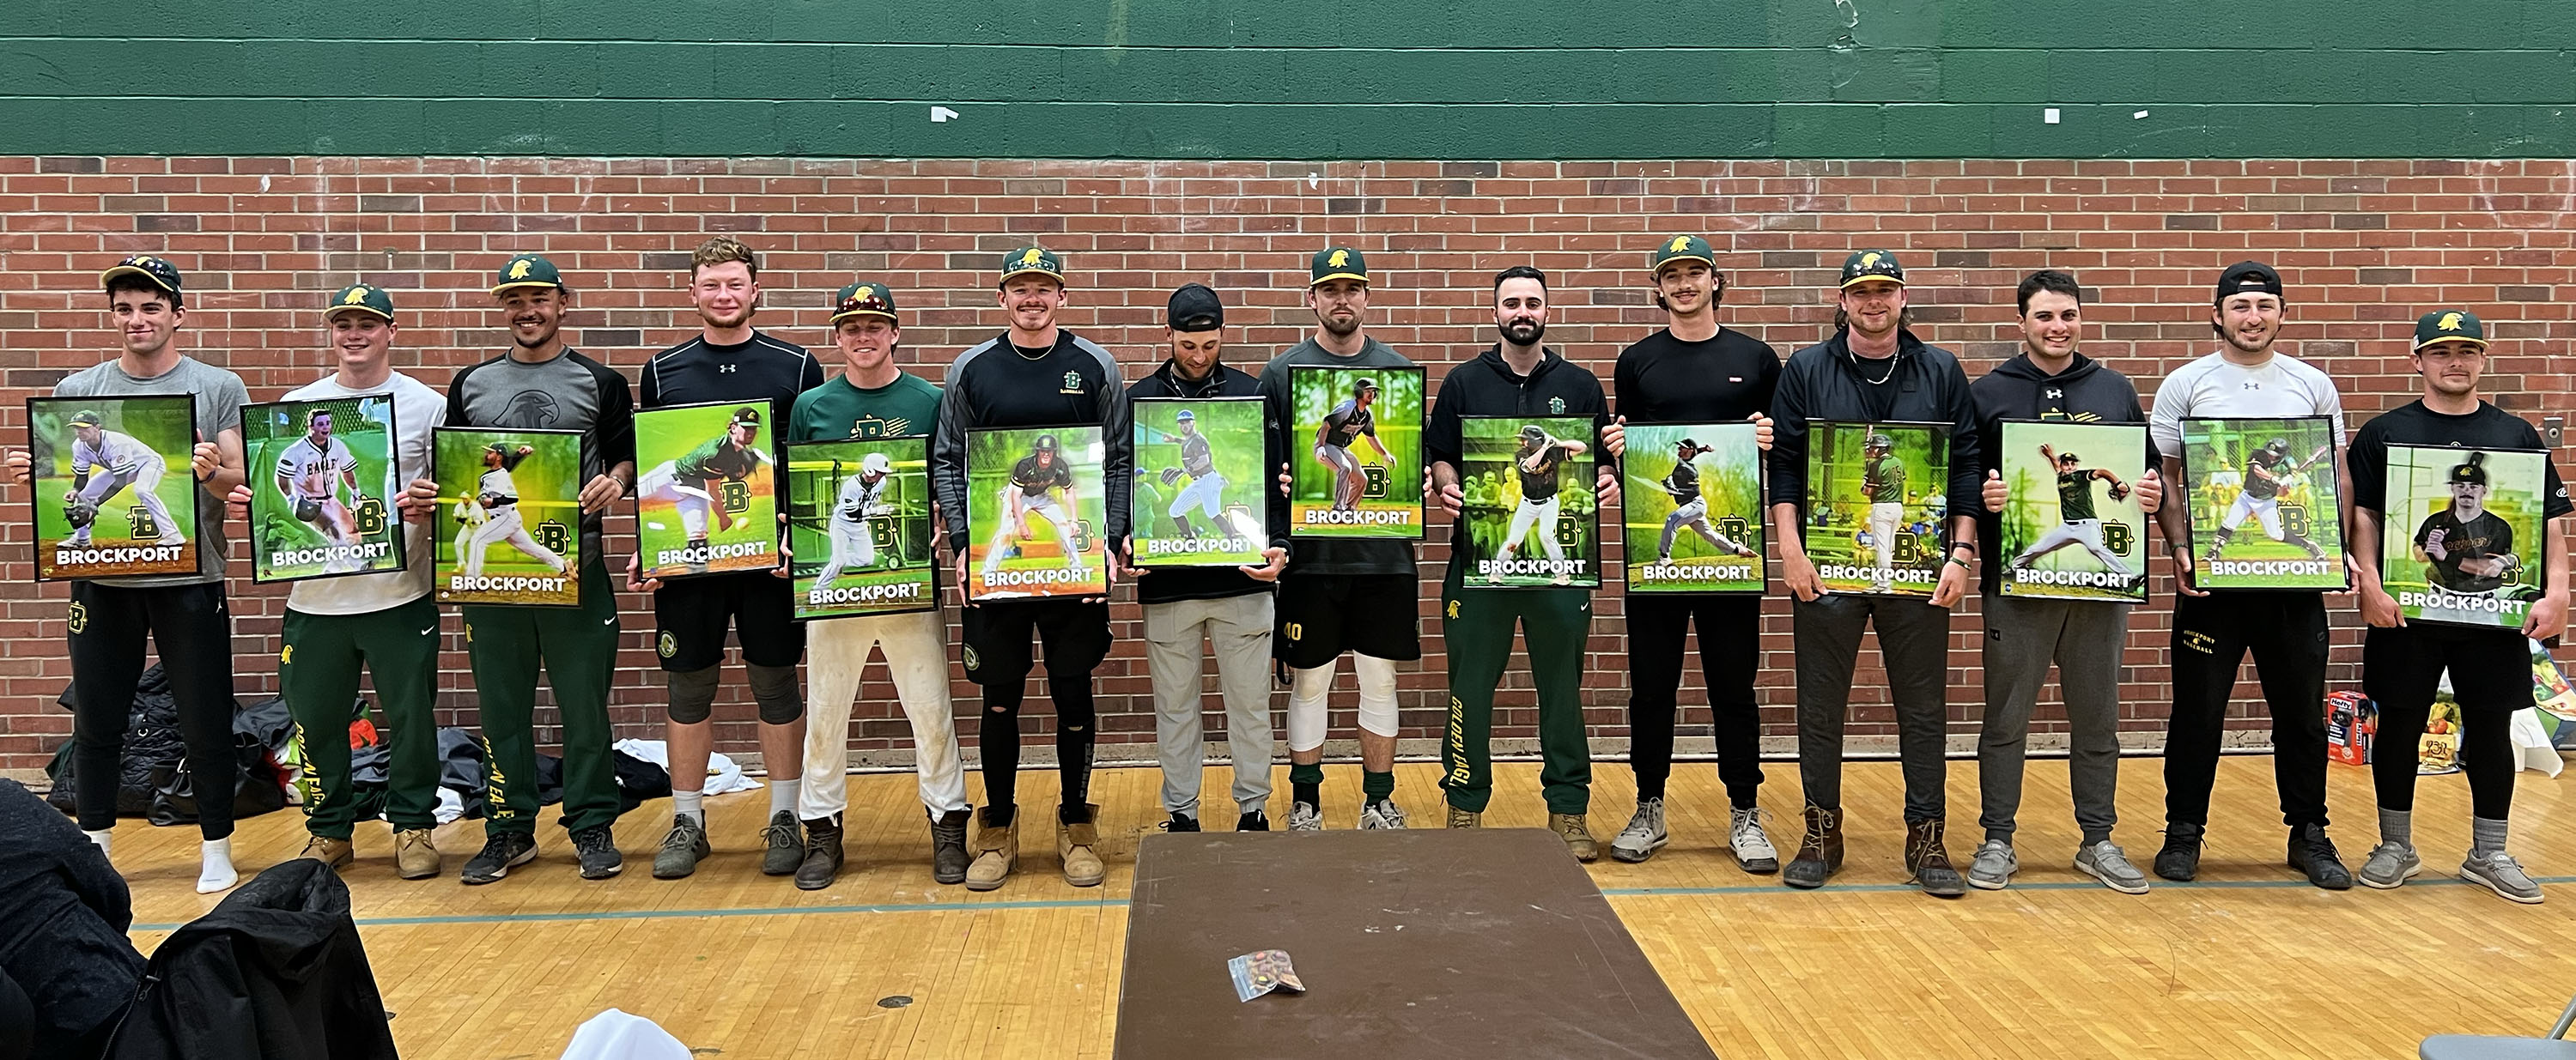 Brockport Baseball Team with their posters